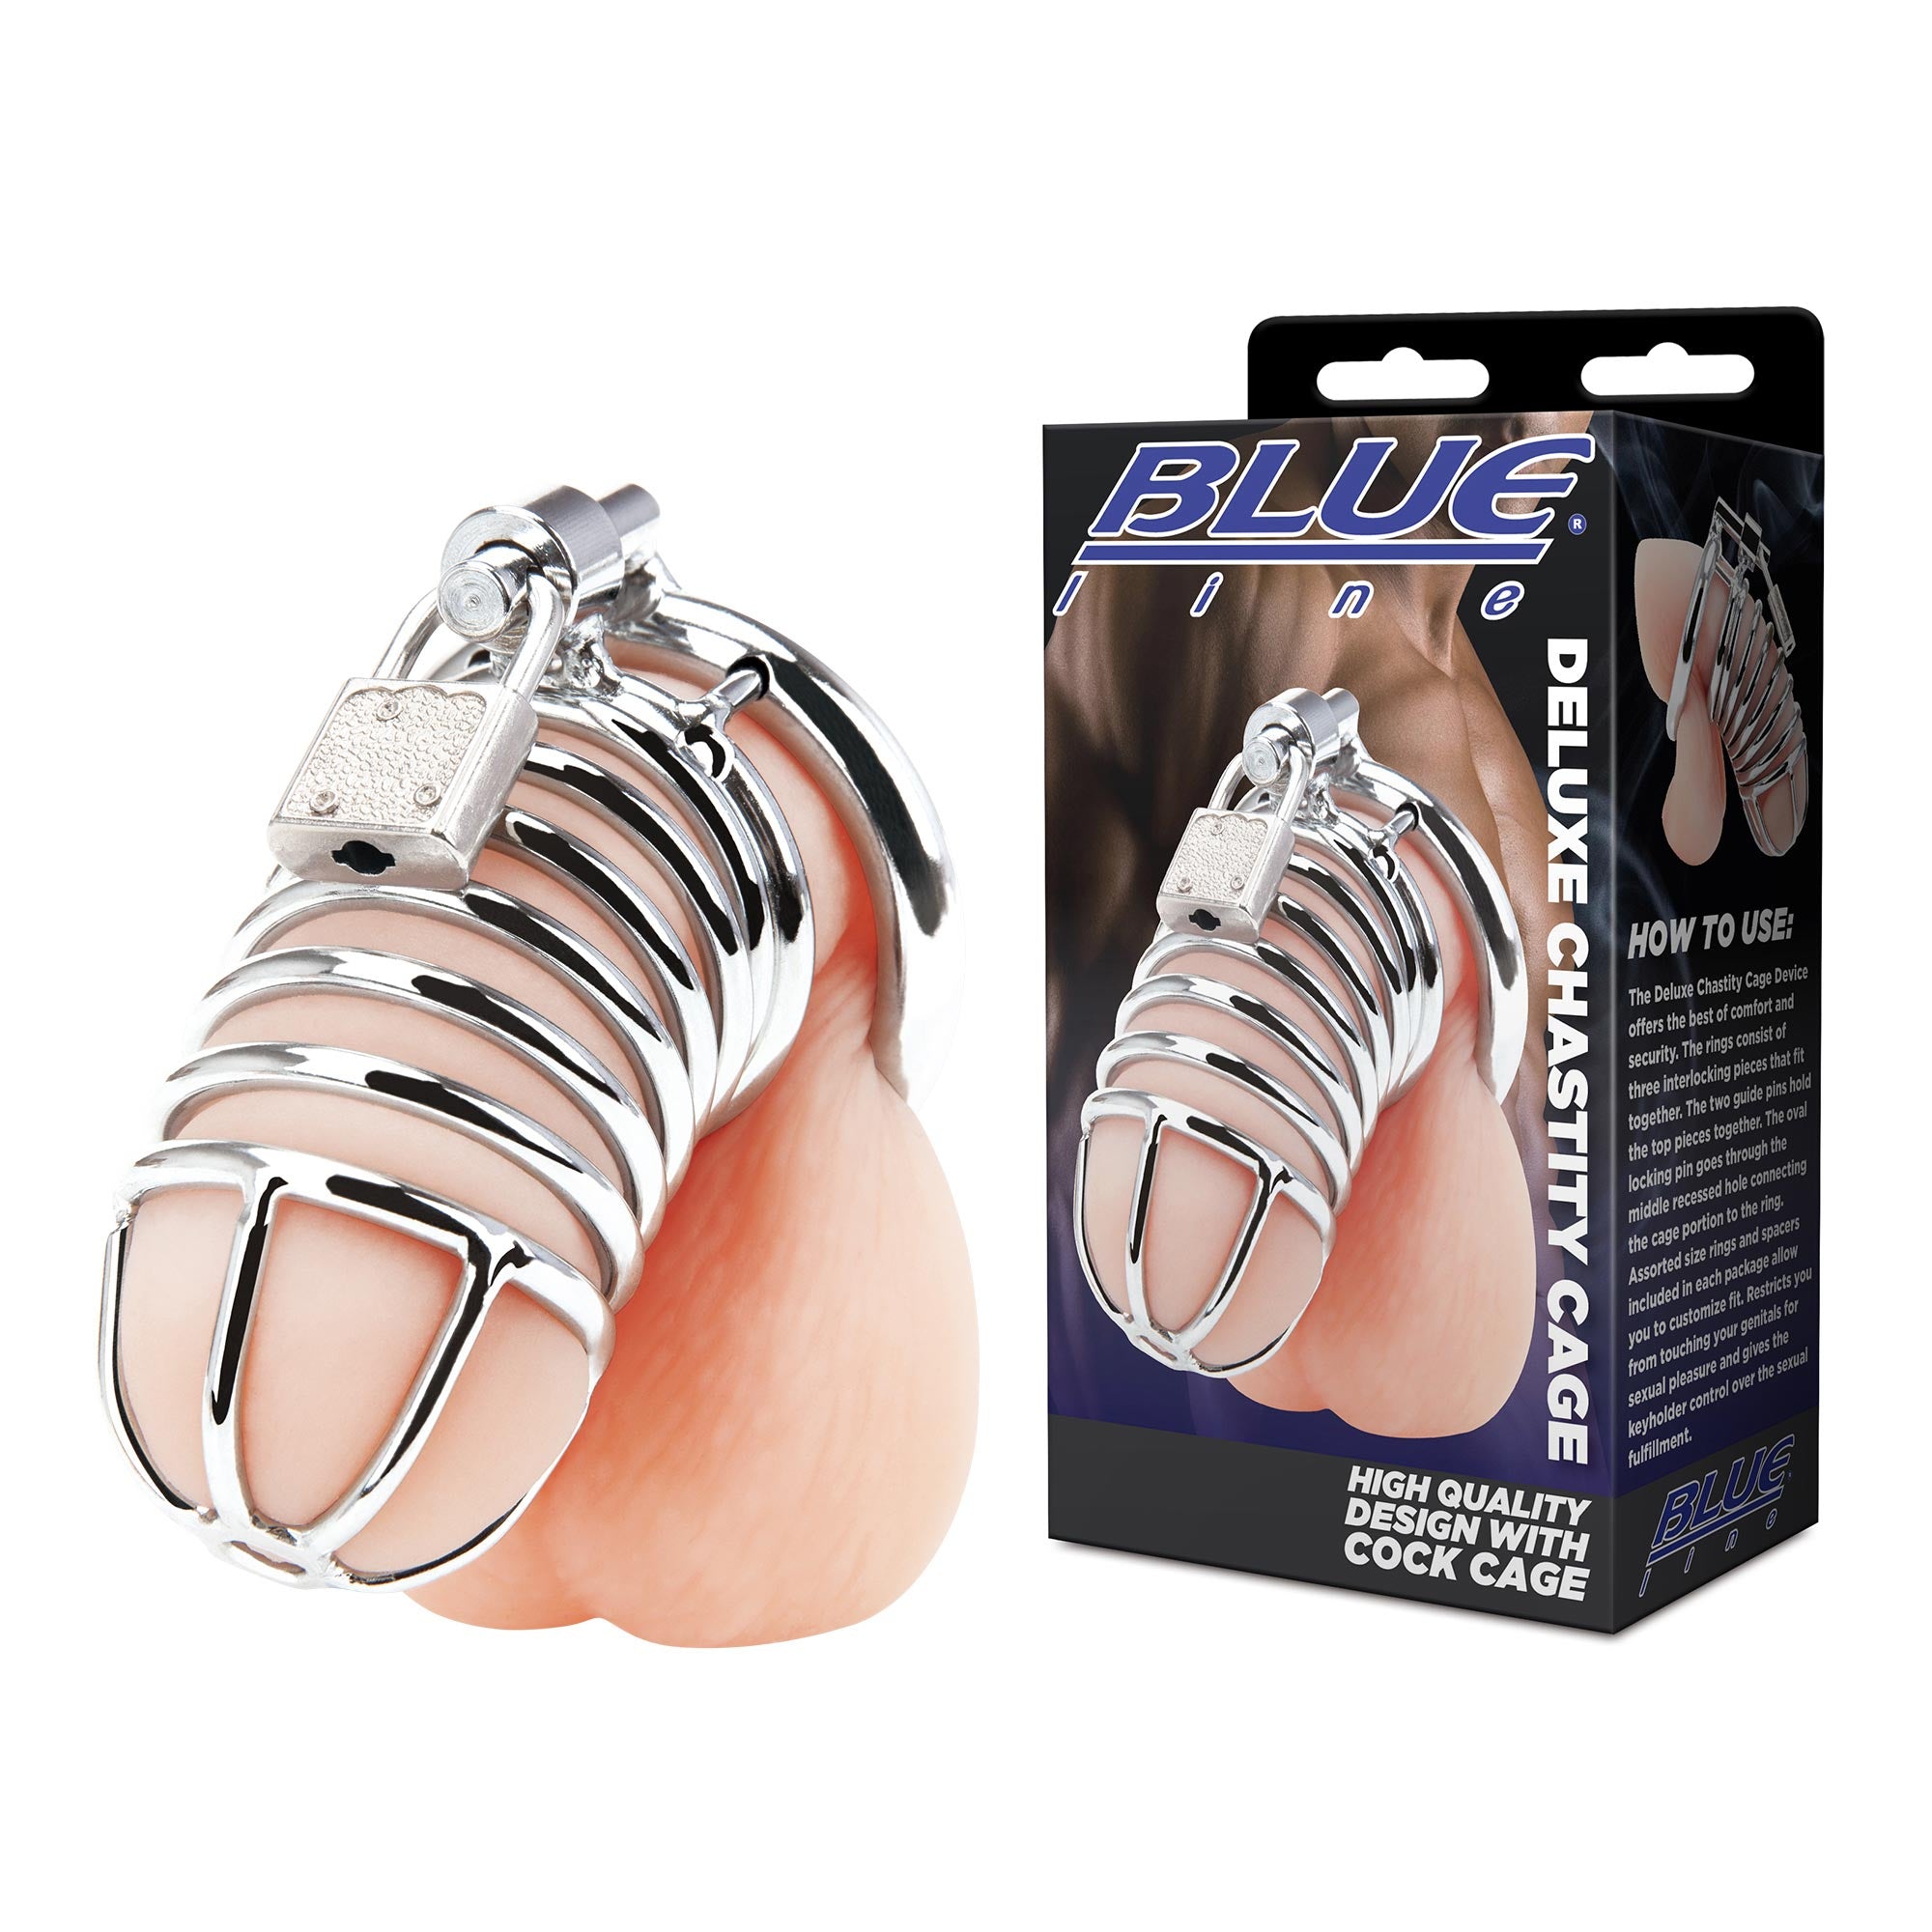 Blue Line Men Deluxe Chastity Cock Cage with Lock Gläs pic picture